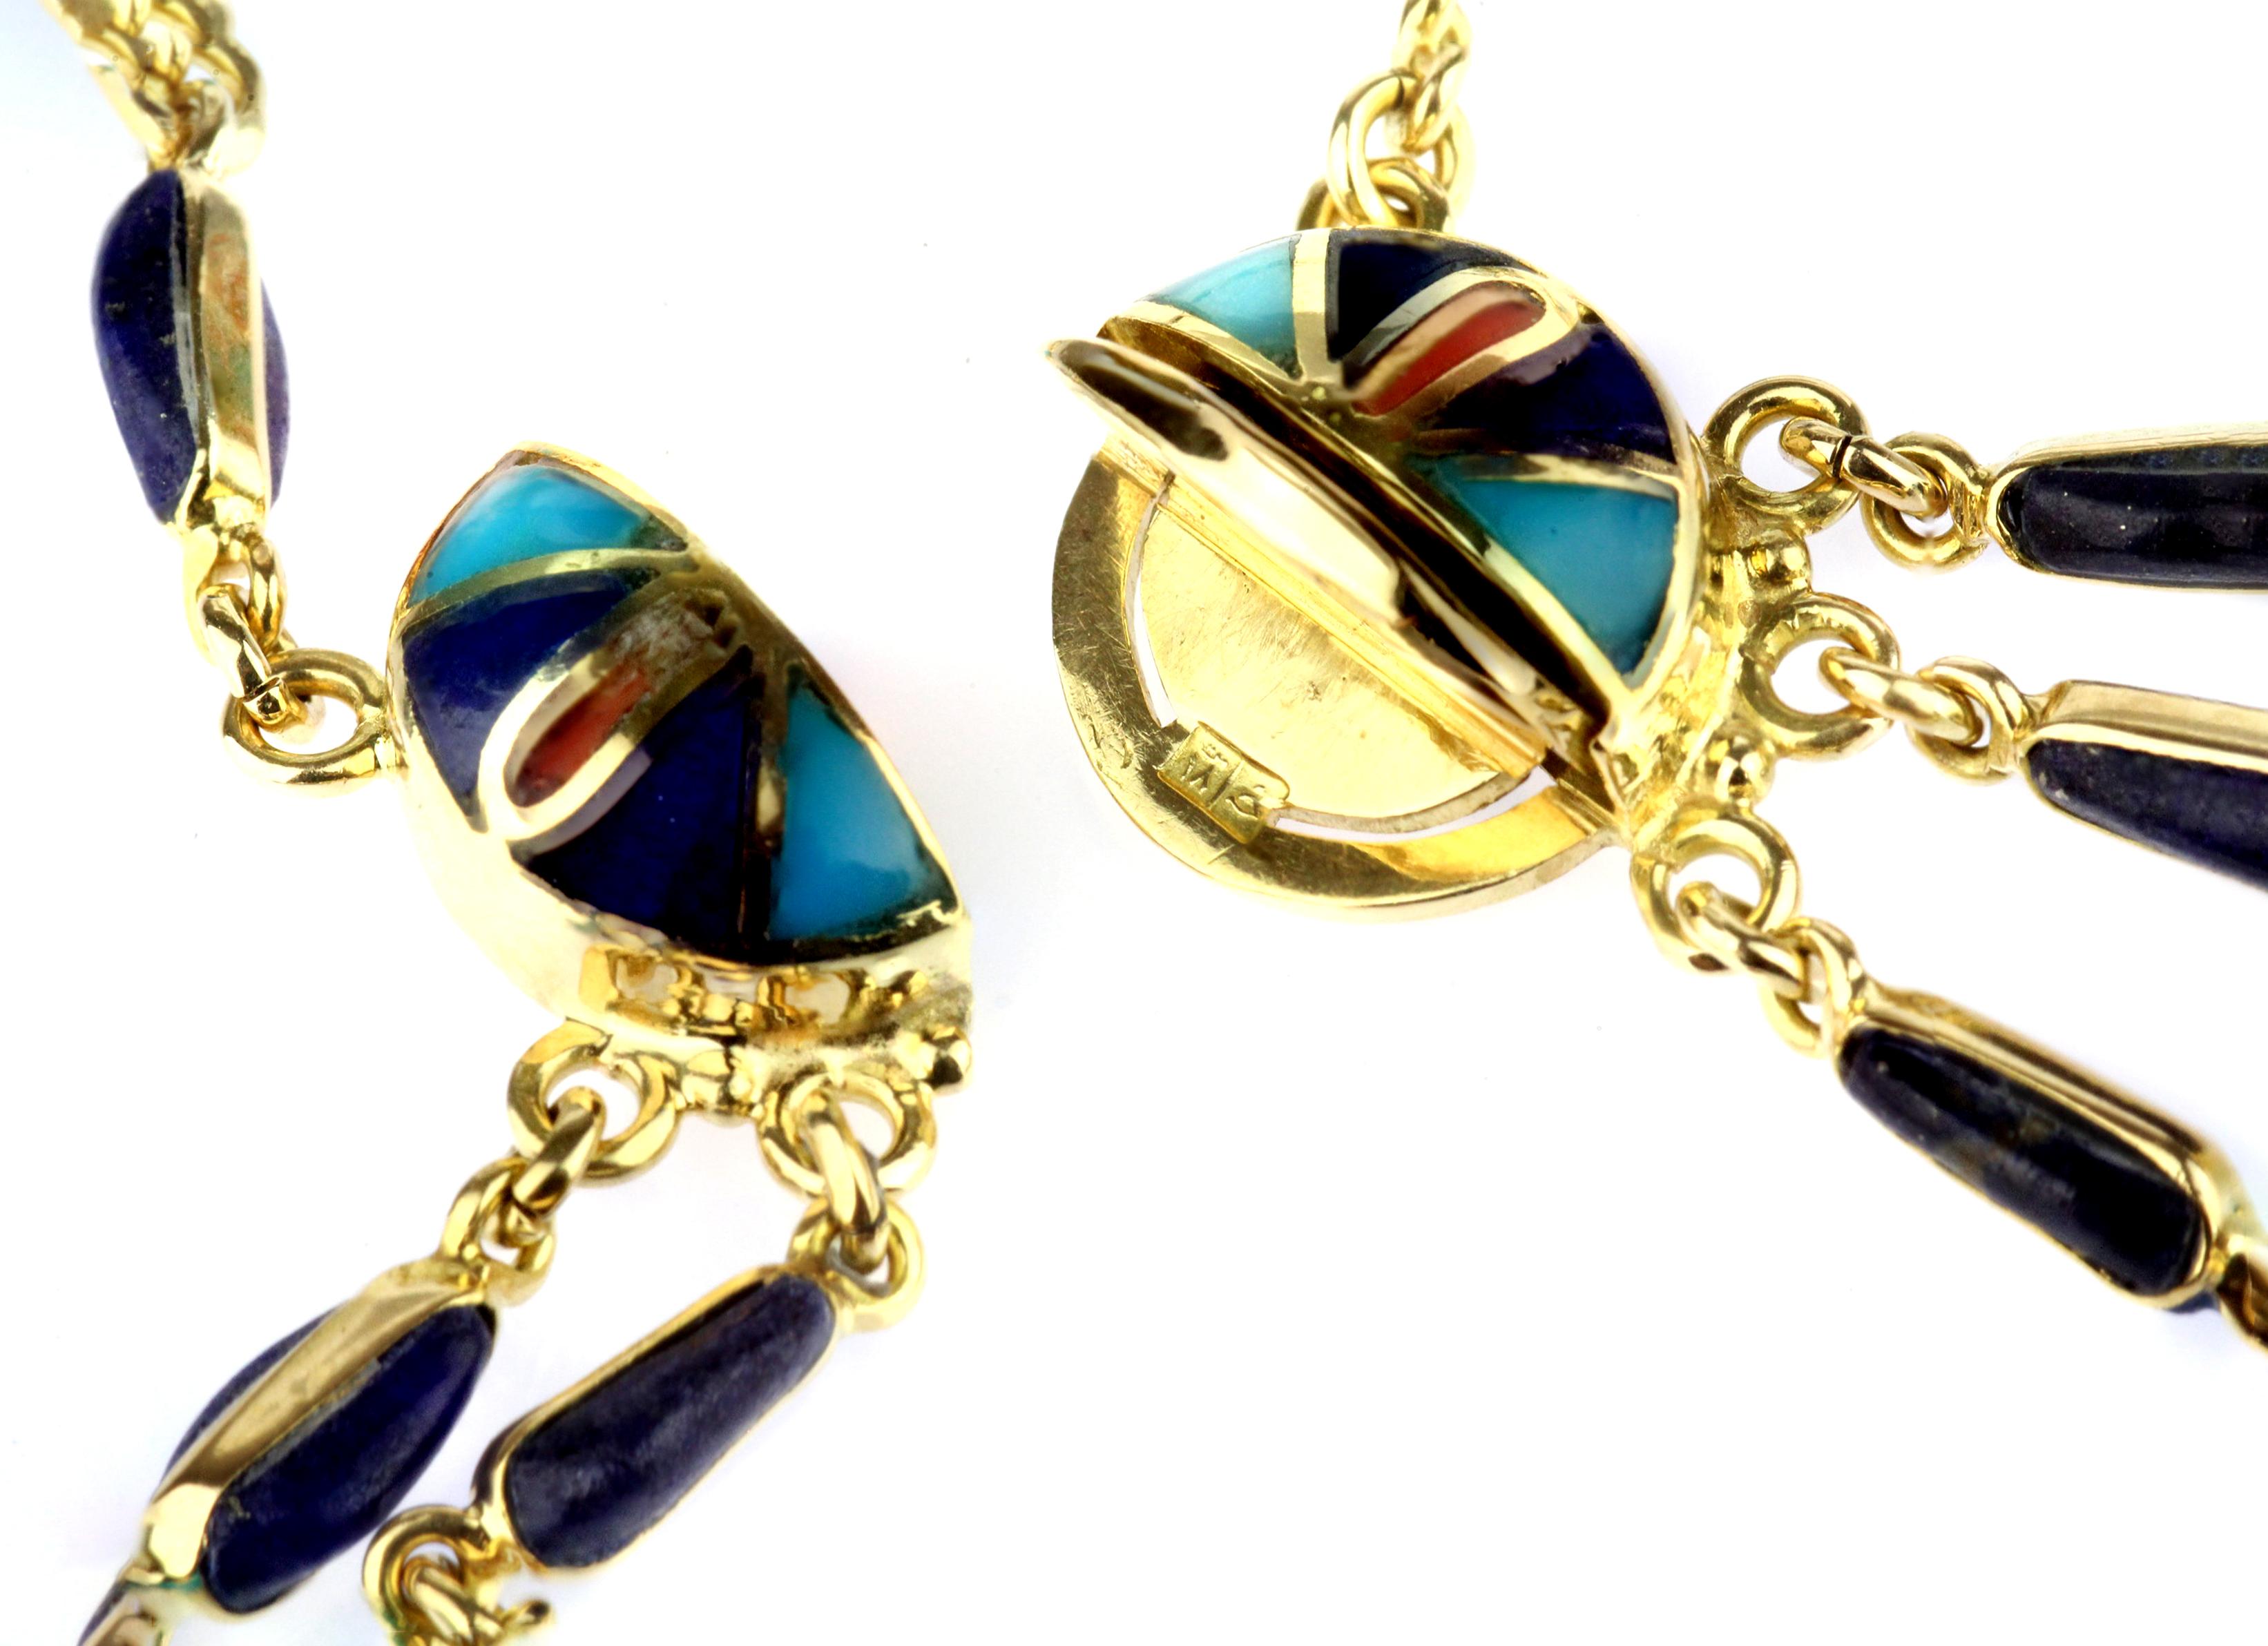 Vintage Eagle Necklace in 18K Gold, Coral, Lapis Lazuli, and Turquoise Mosaics For Sale 3